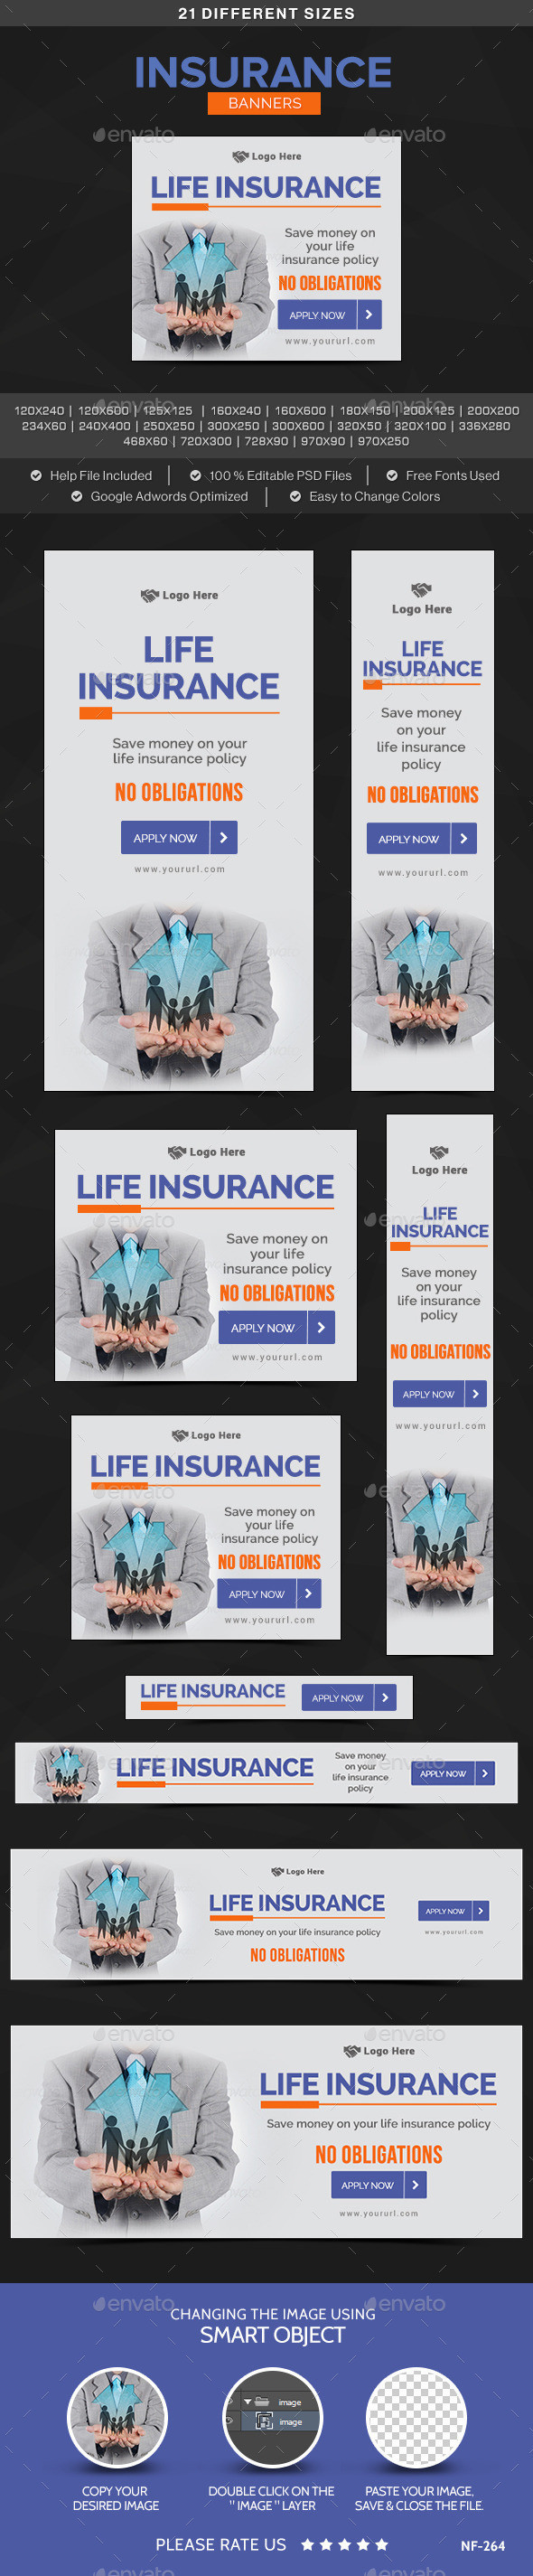 Nf 264 life 20insurance 20banner preview